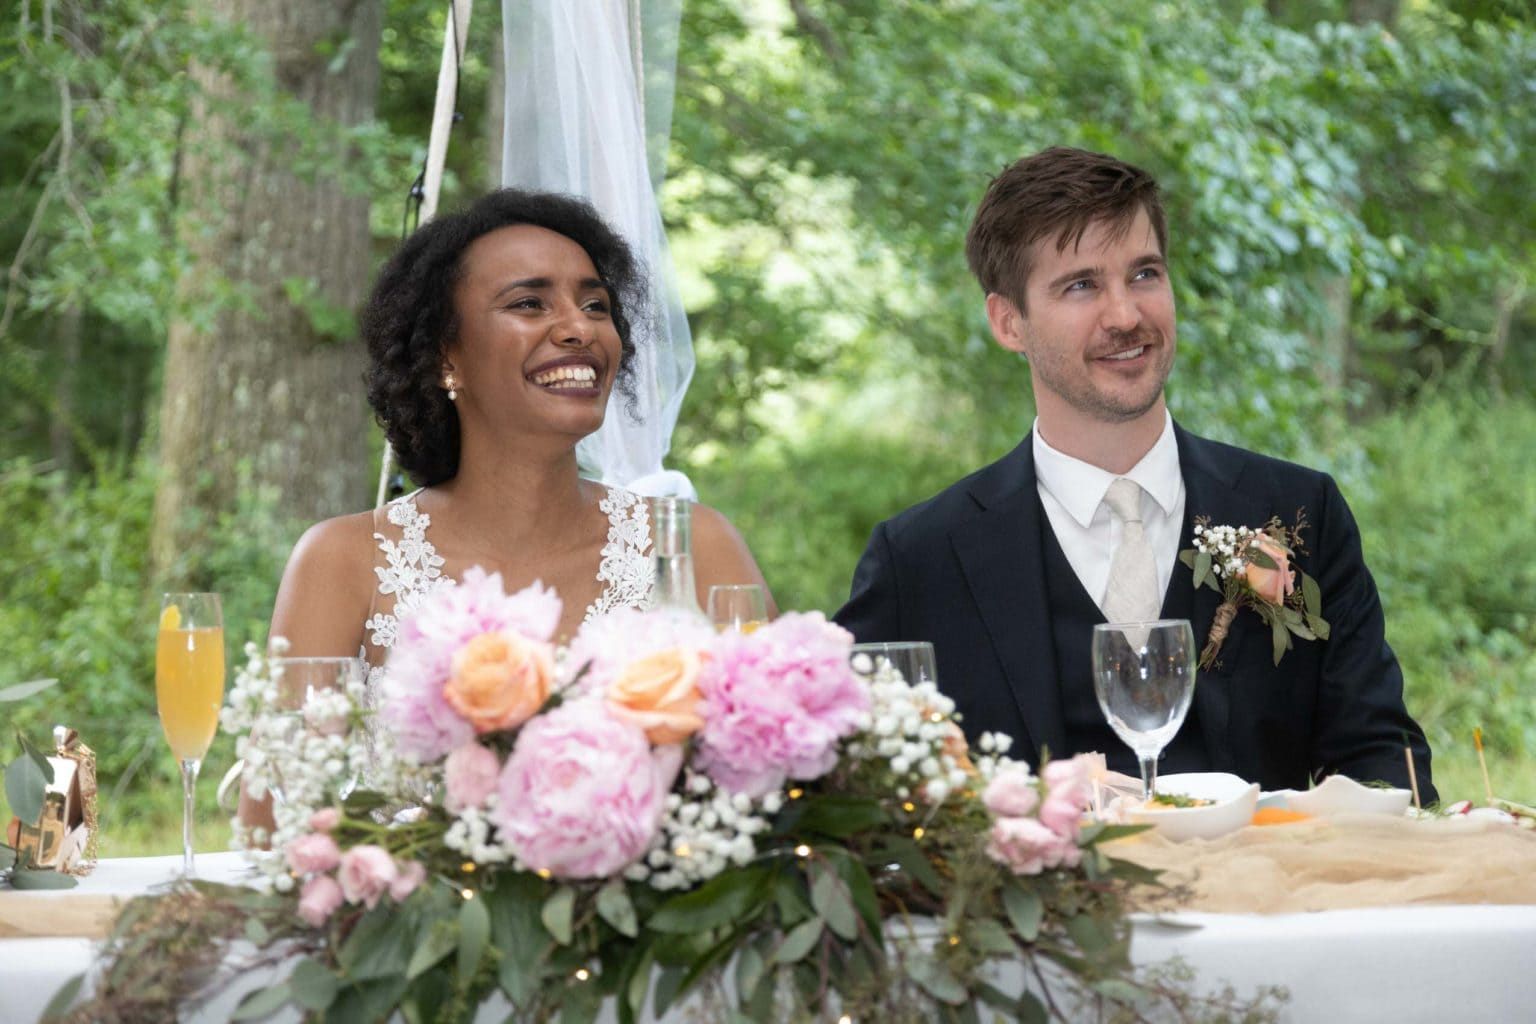 A bride and groom are sitting at a table with flowers and wine glasses.